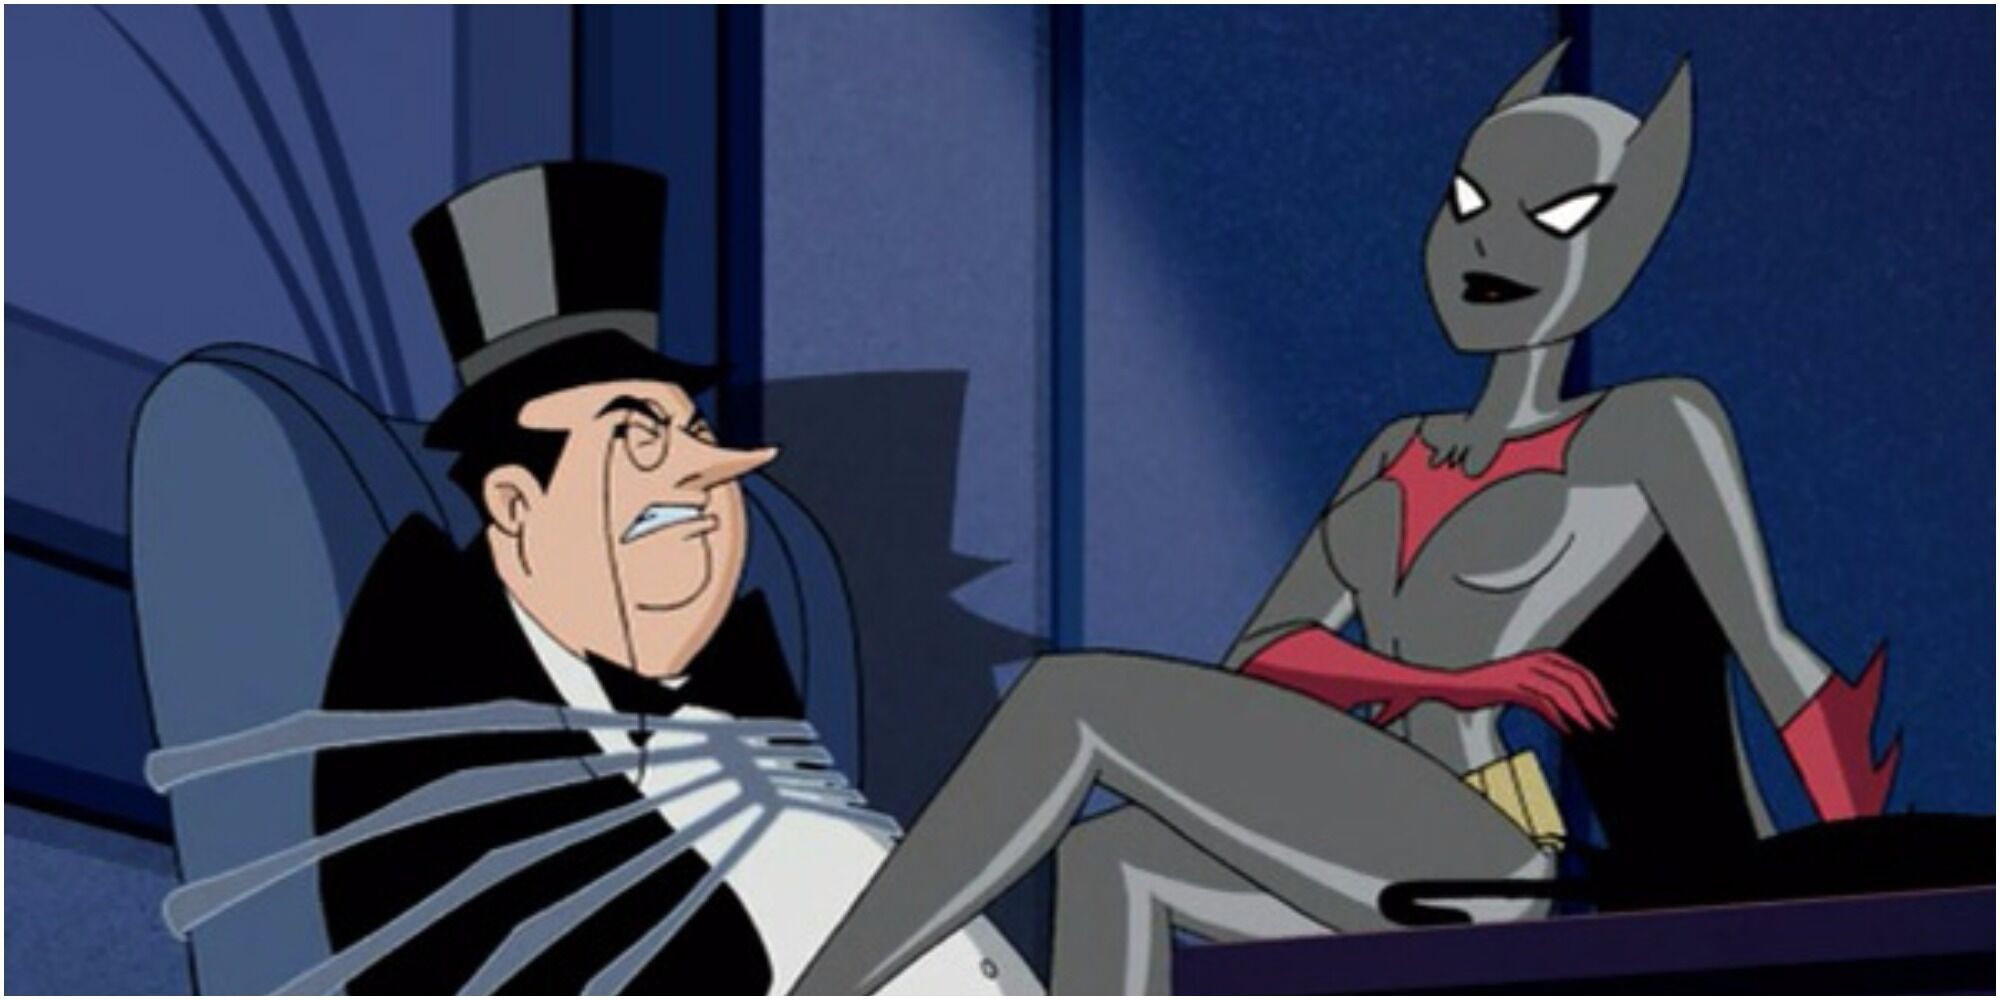 Penguin chats with Batwoman in Mystery Of The Batwoman.